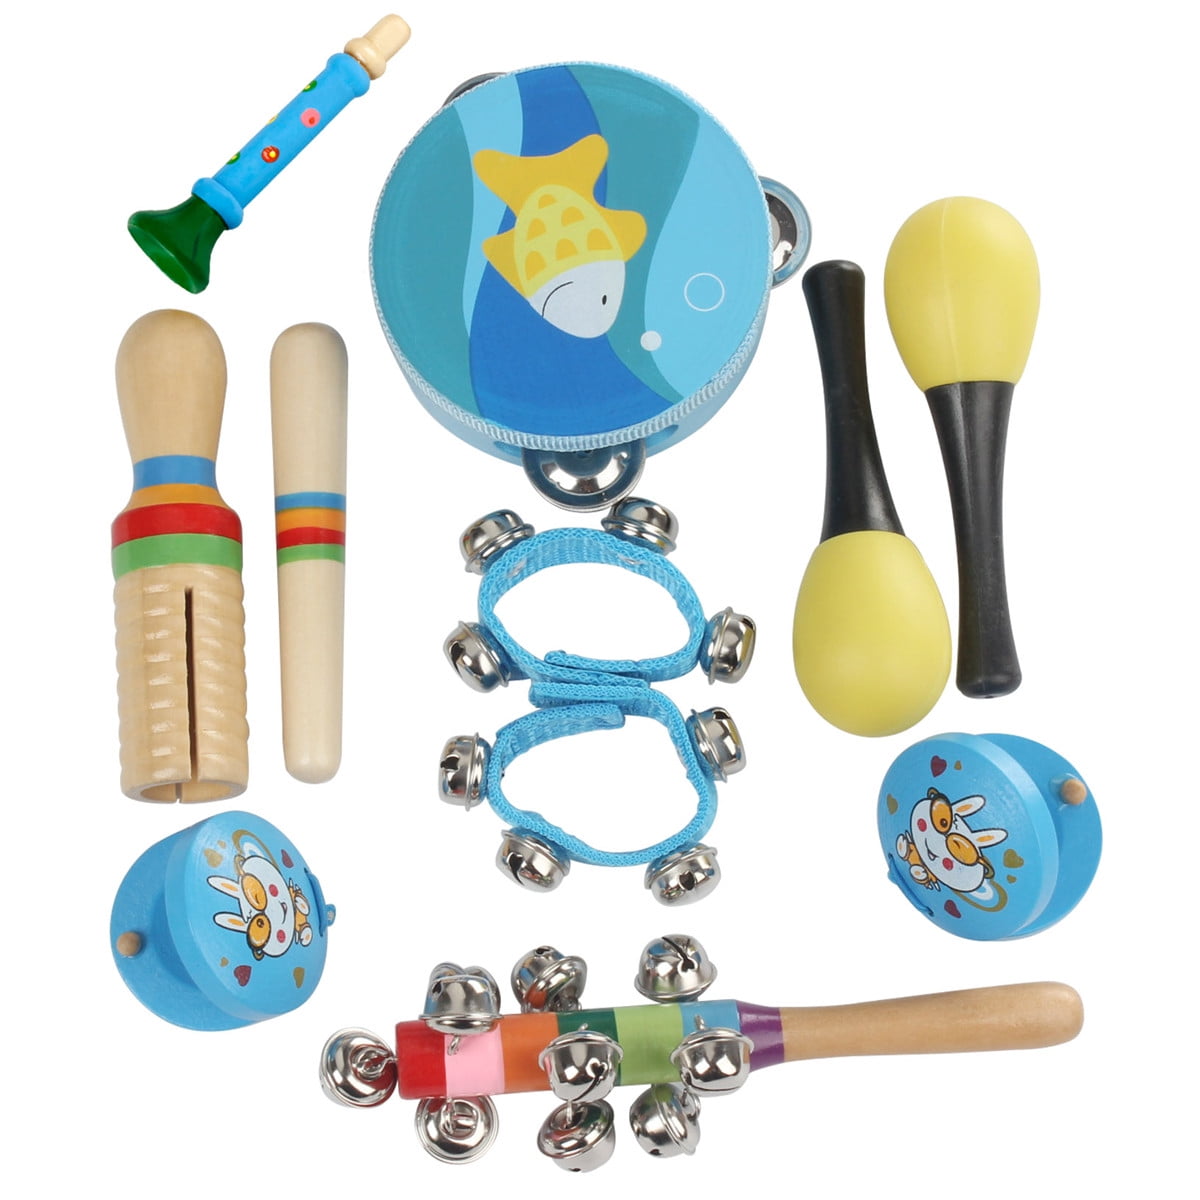 Kids Toddler Early Musical Toy Gift Tambourine and Maracas Orff Instruments 